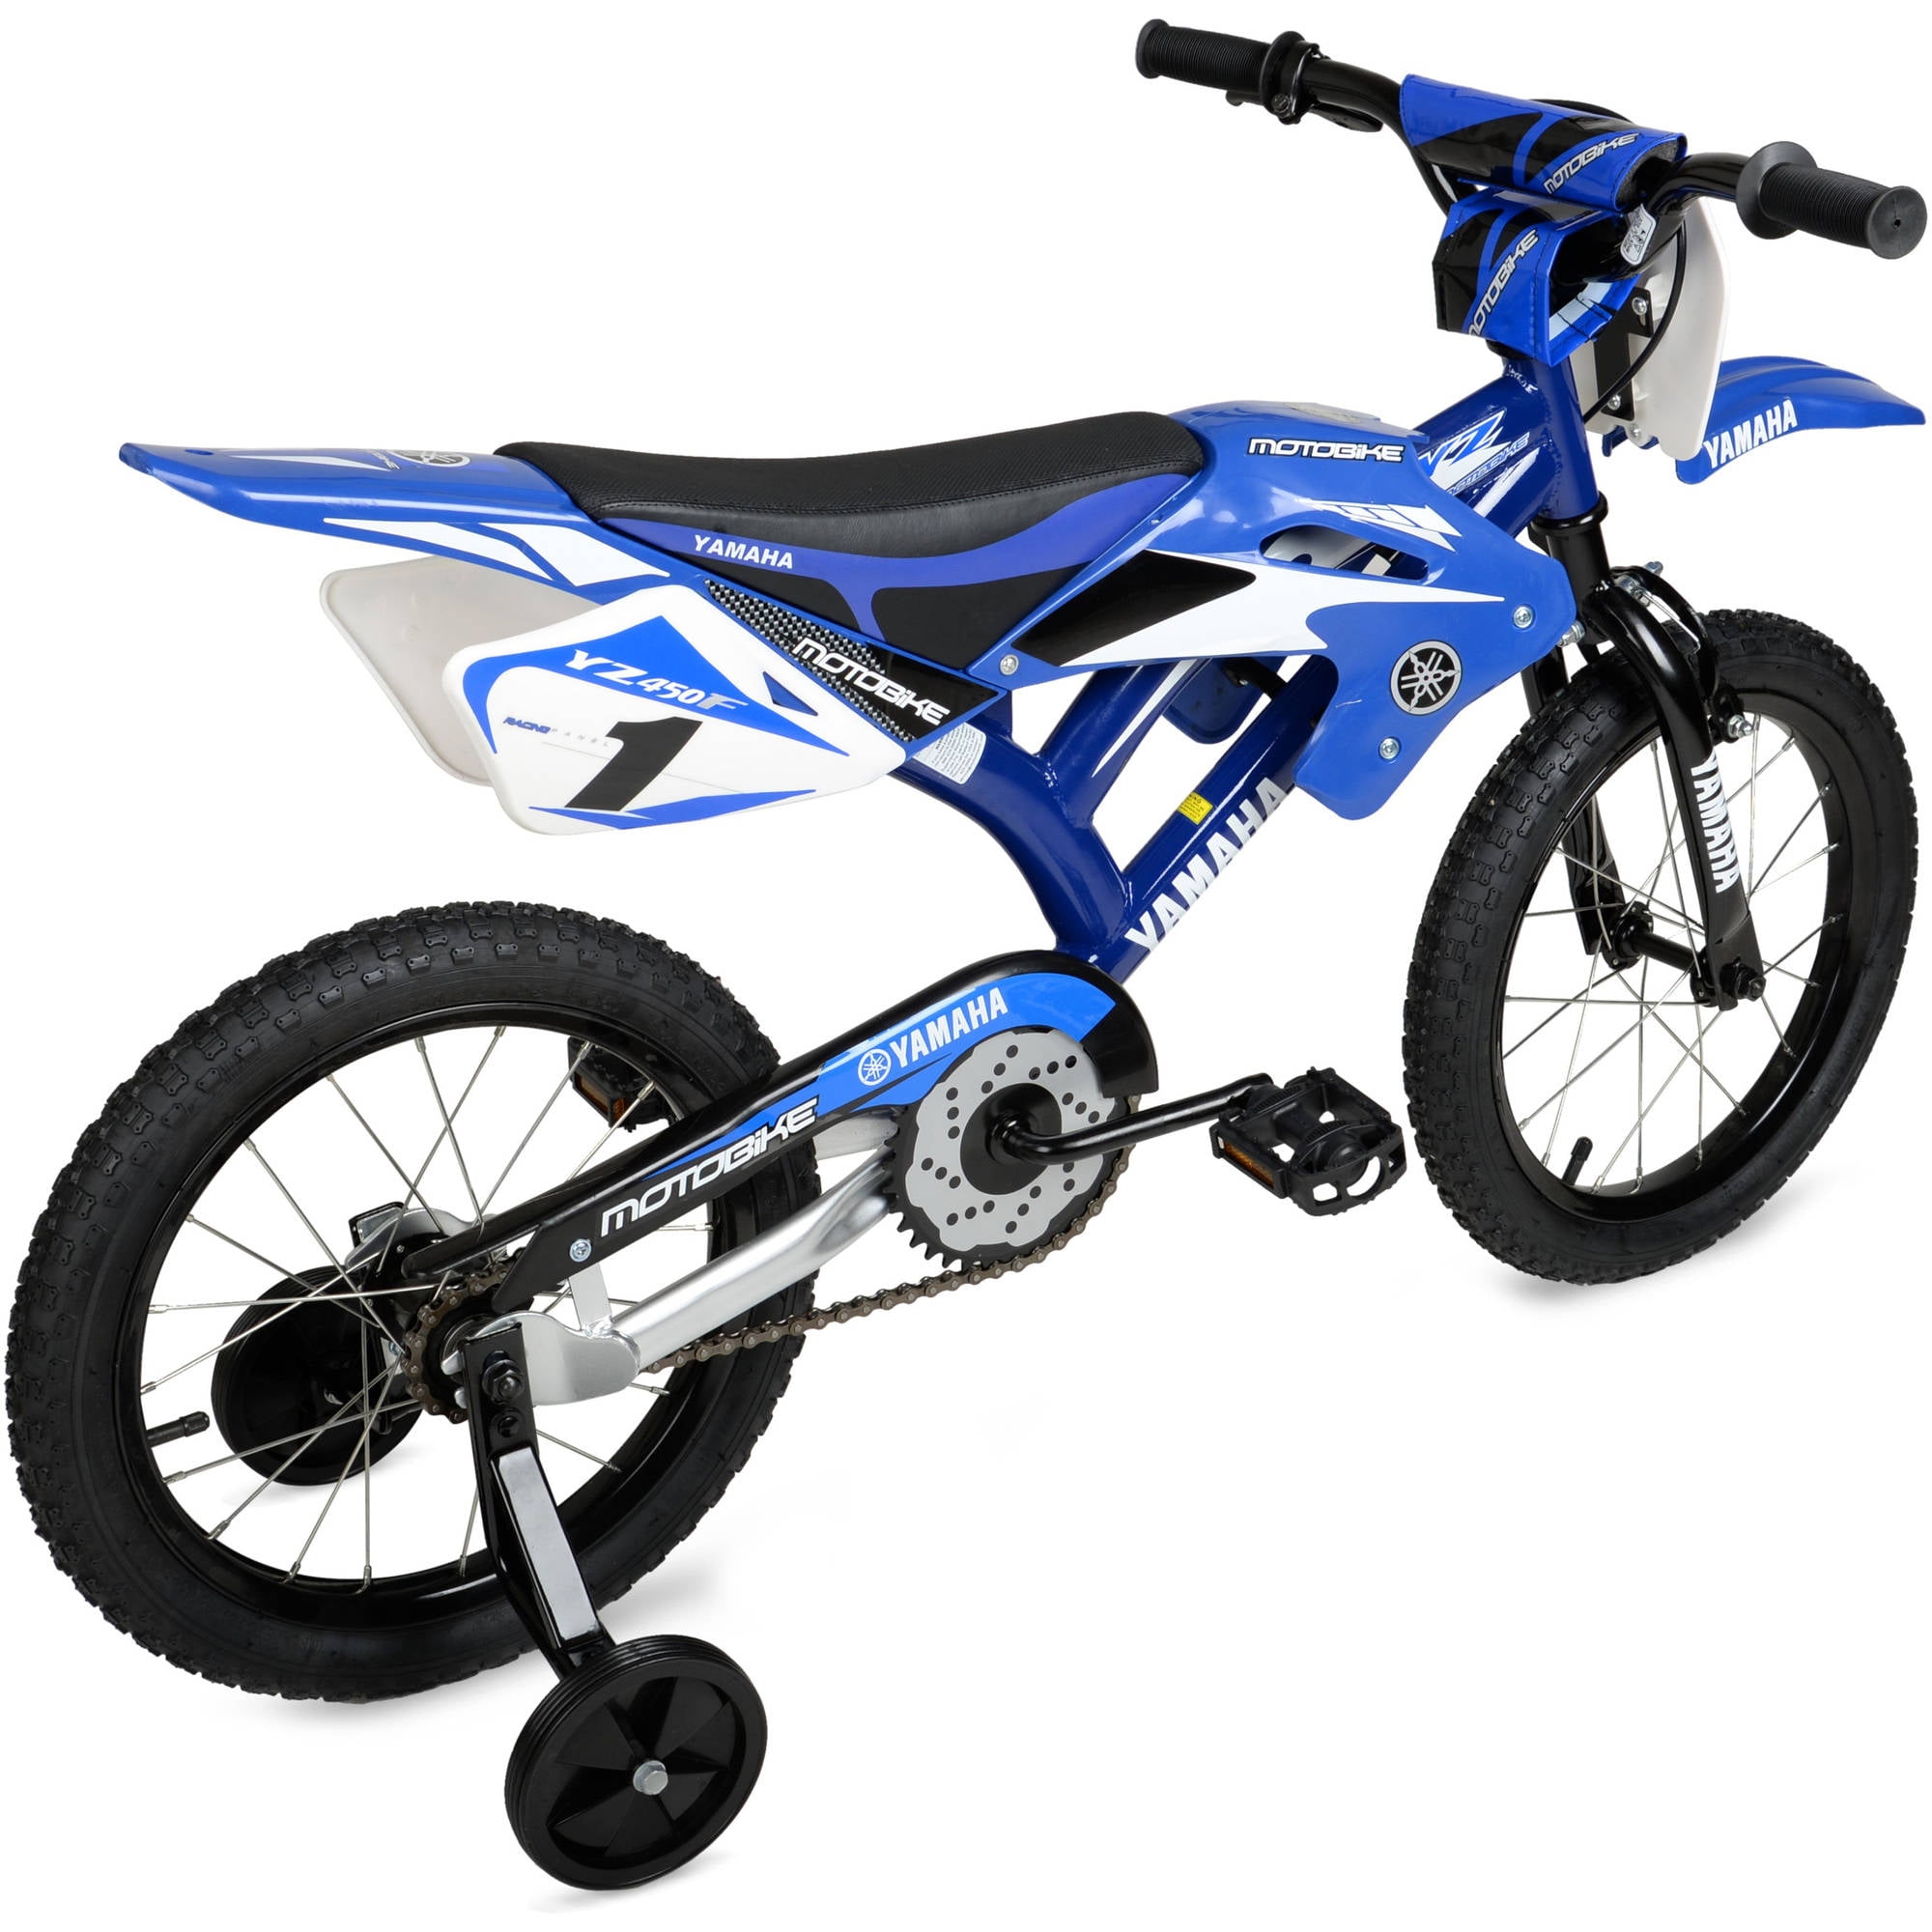 Yamaha WMA-111201 12 inch Moto BMX Sports Motorcycle Blue for sale online 